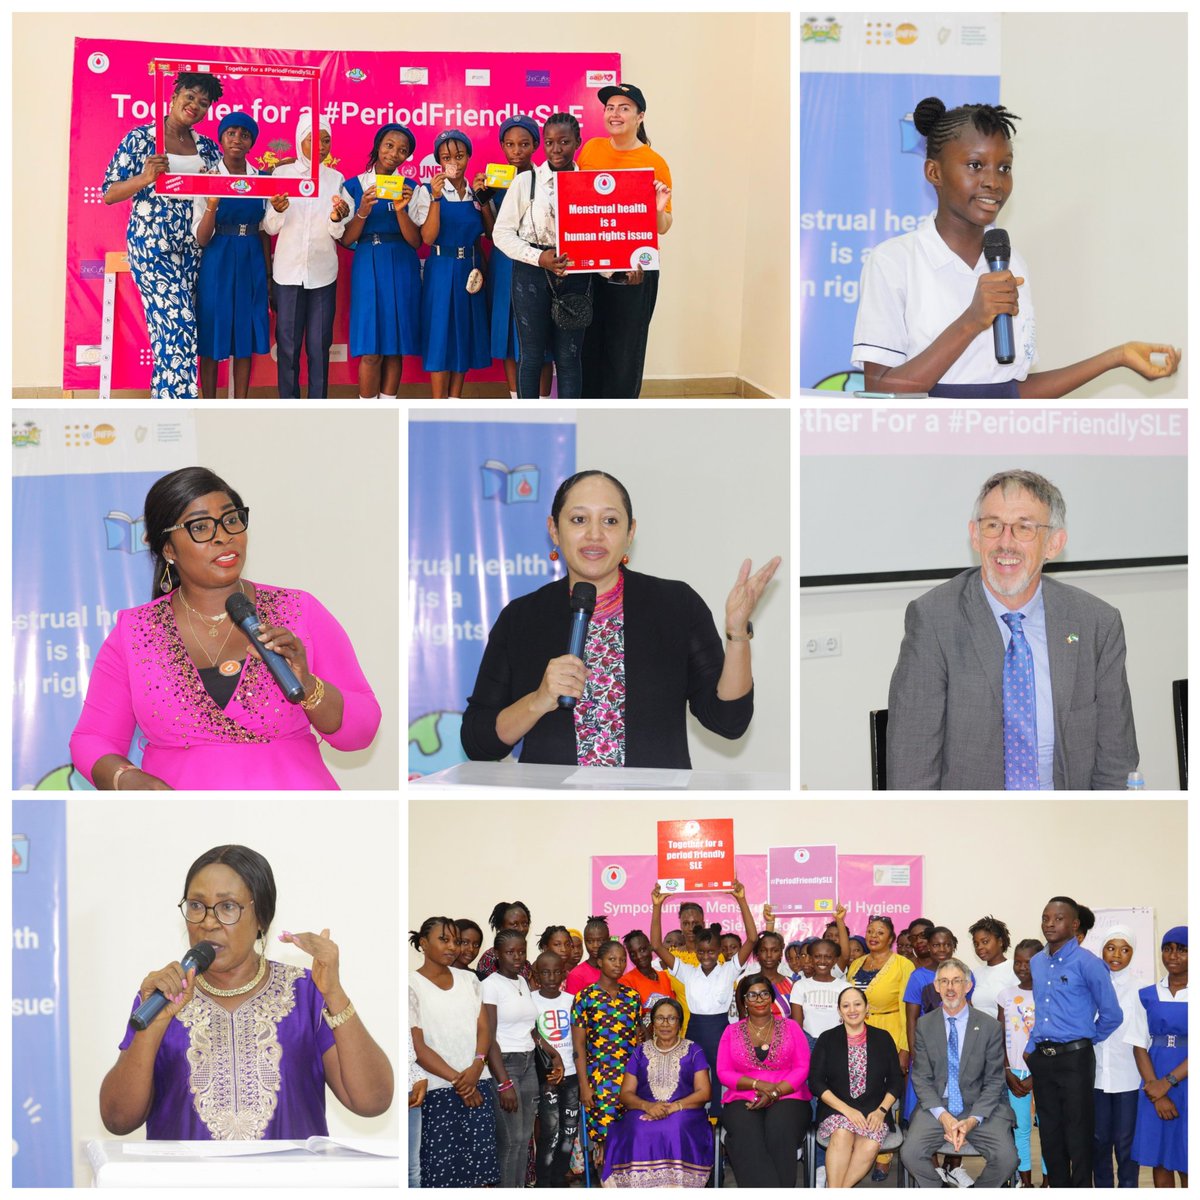 #HappeningNow: Excited to join @mogca_S_L, @MOBSSE_SL, @Irlembfreetown, UN agencies, girl-led orgs, CSOs & adolescents to mark #Menstrual Hygiene Day! 🌸 Together we are celebrating progress and charting the path to a #PeriodFriendlyWorld for all. #MHDay #PeriodFriendlySLE